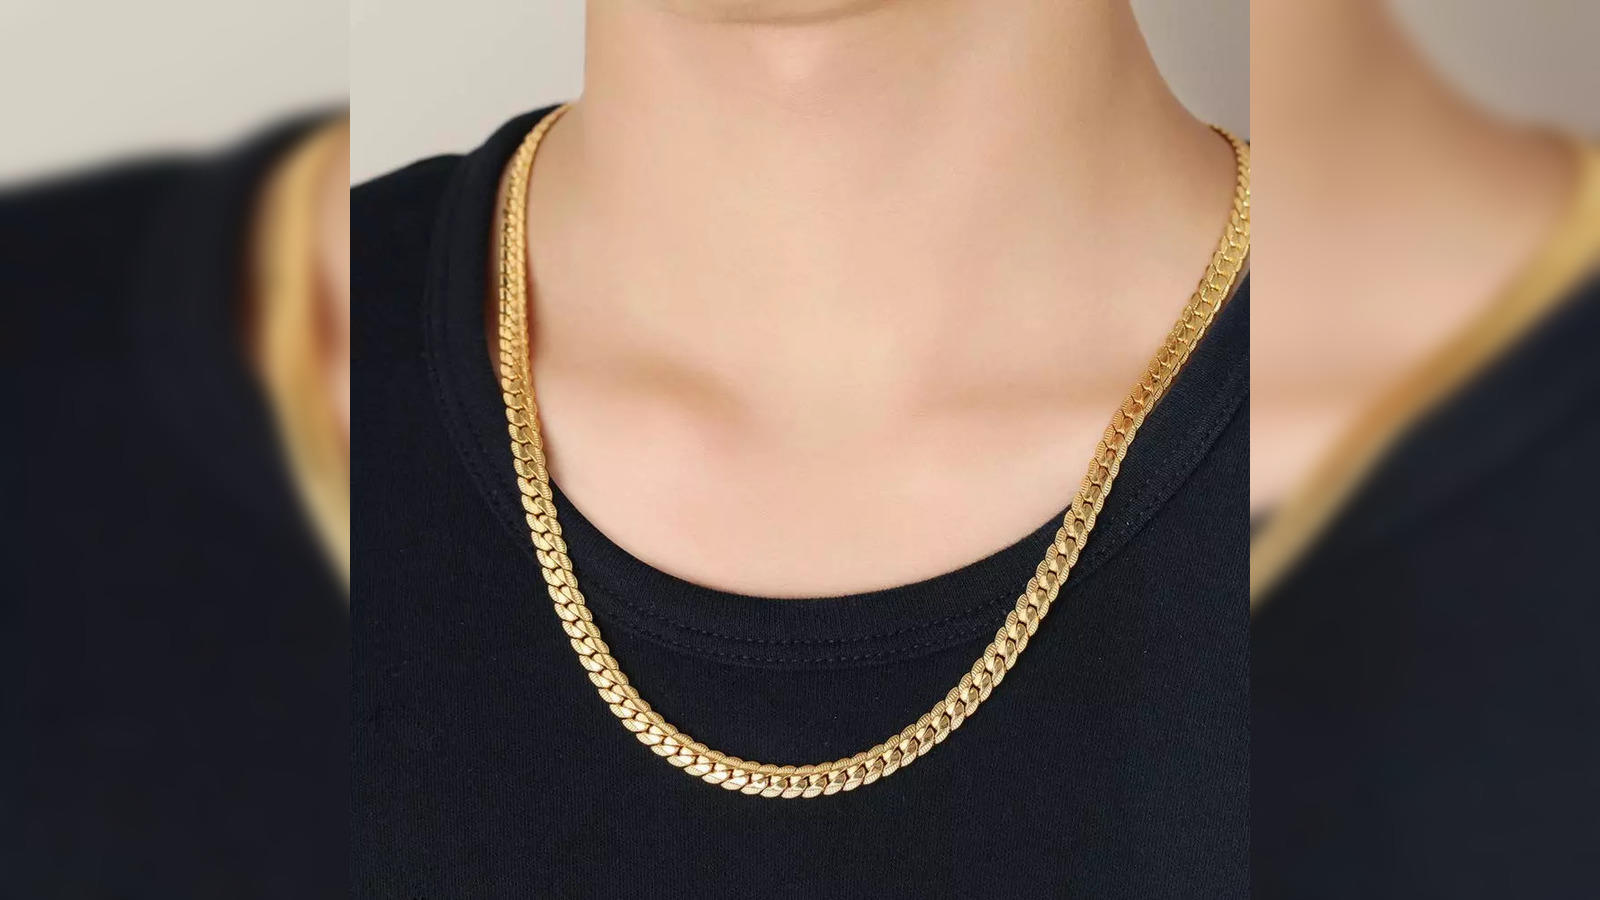 Top 20 Popular Chain Necklaces For Men Today